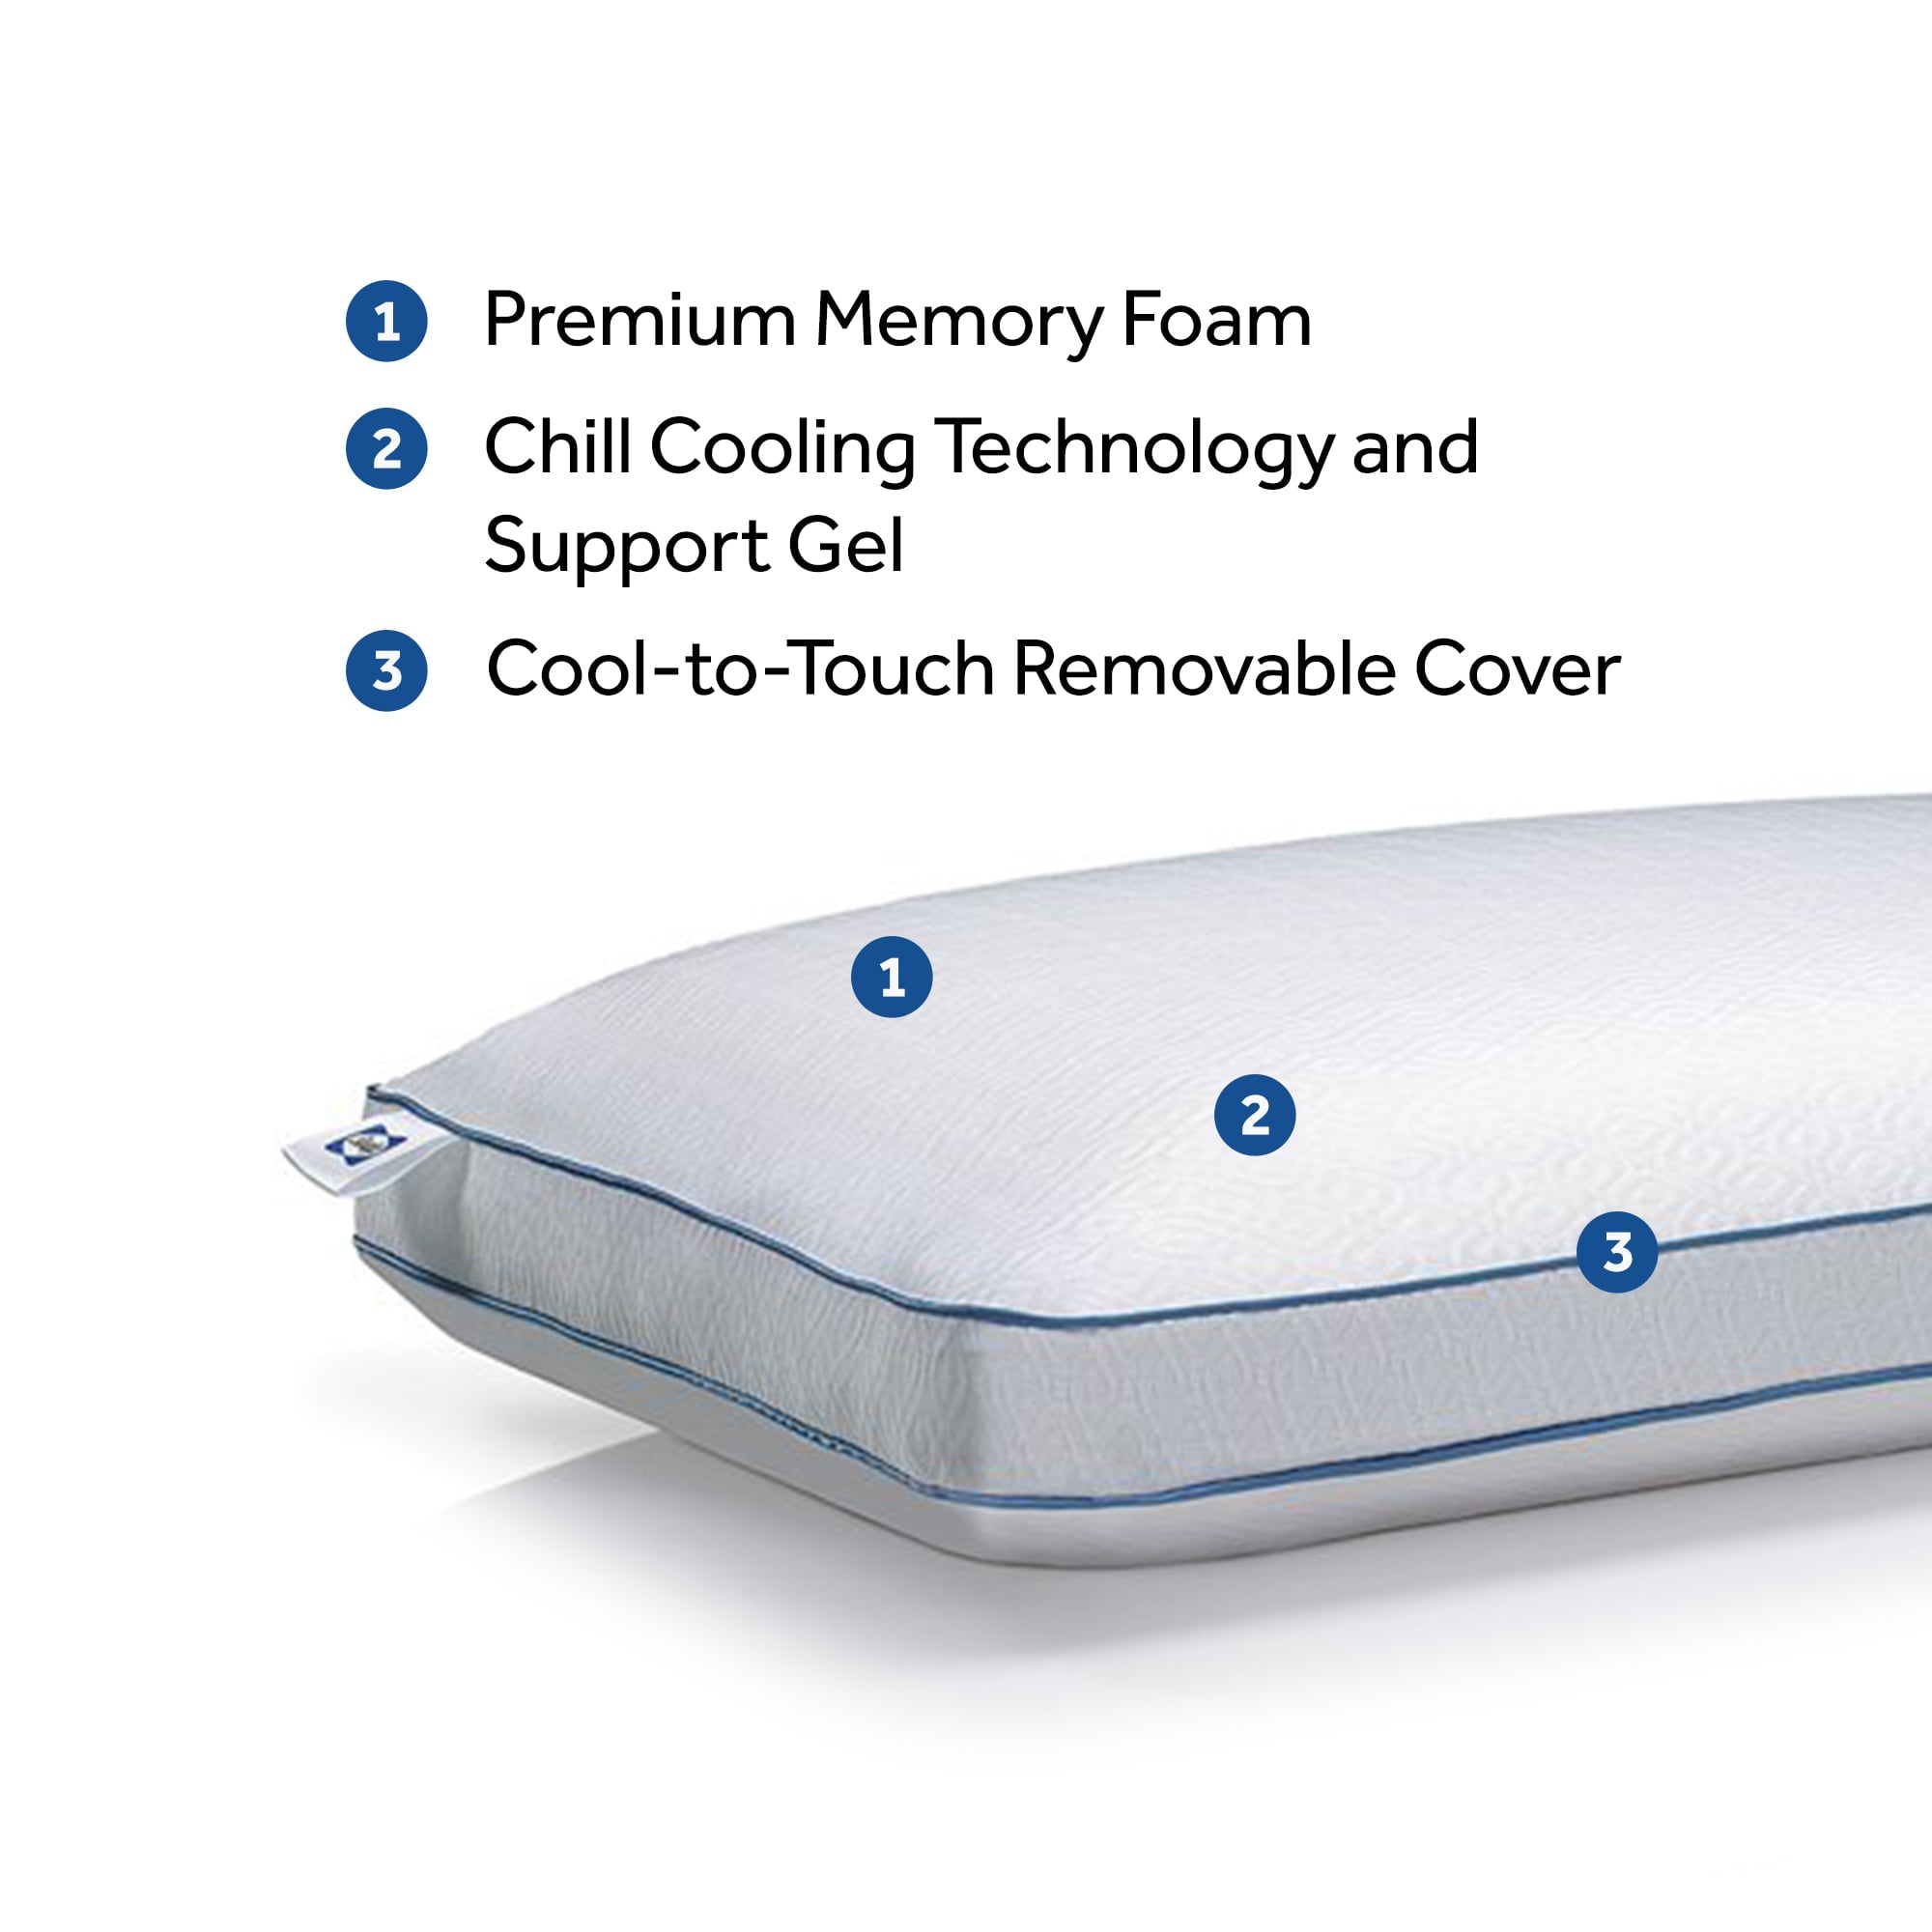 Sealy Chill Cooling Memory Foam Bed Pillow with Support Gel, Standard Size